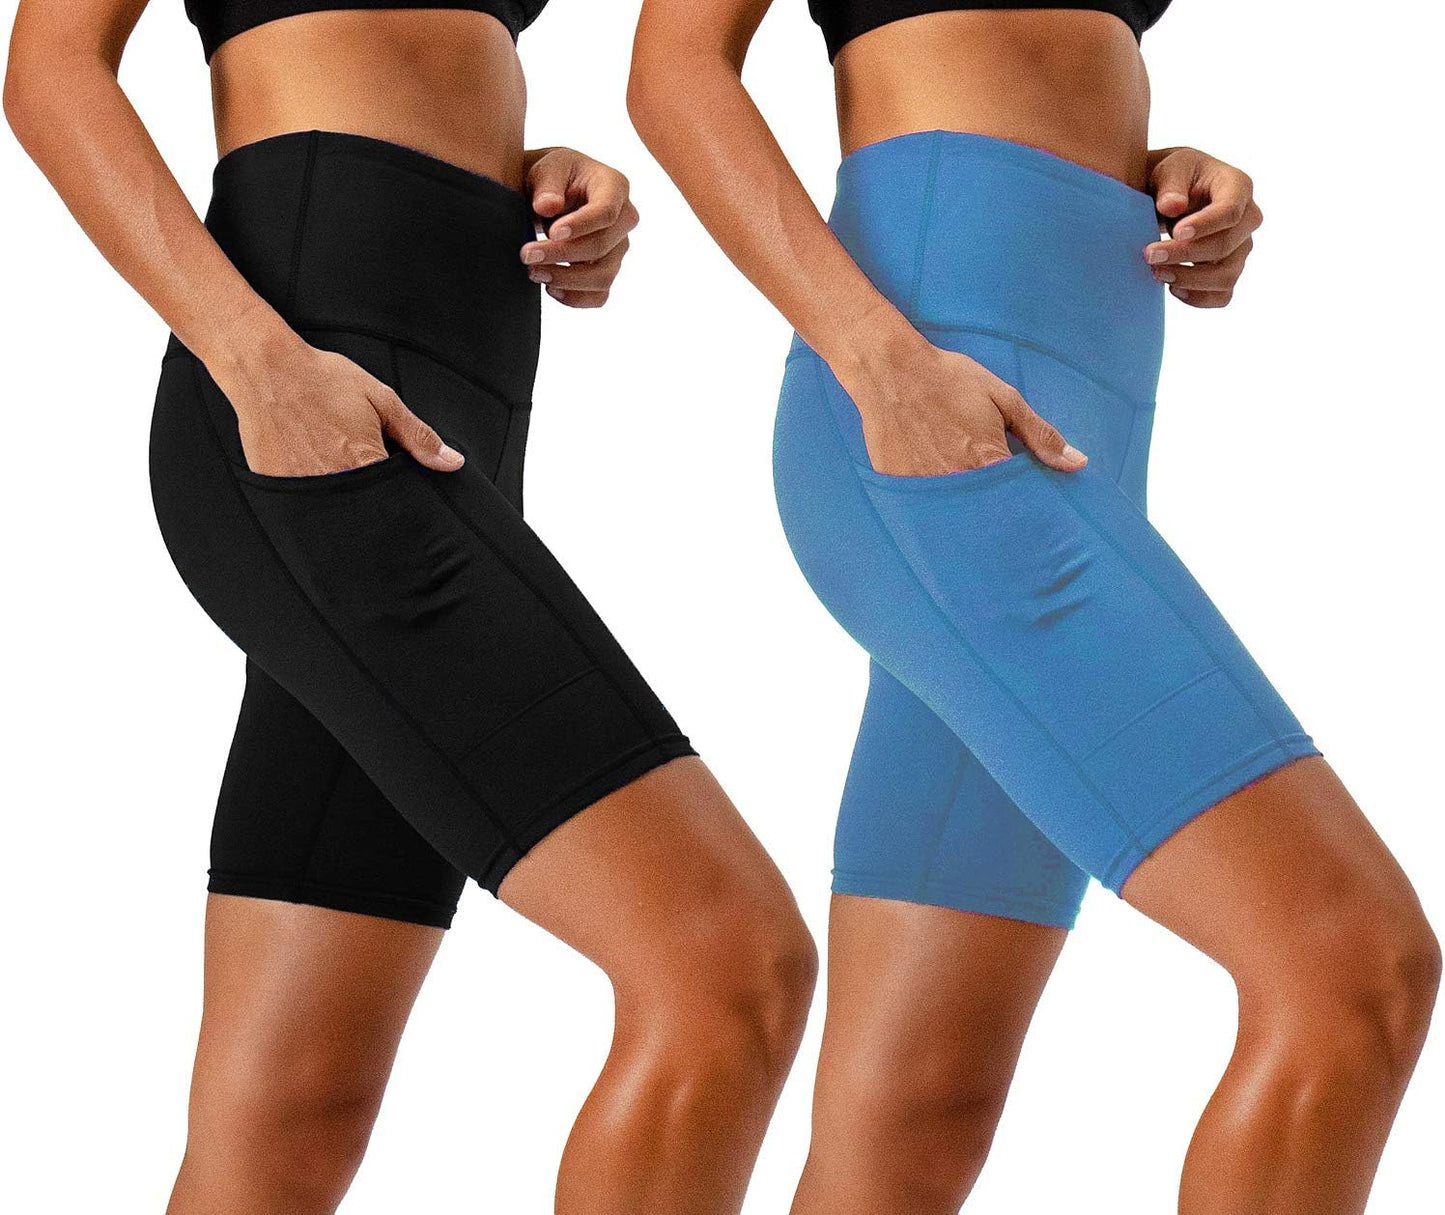 Women's 2-Pack High Waist Shorts with Side Pockets